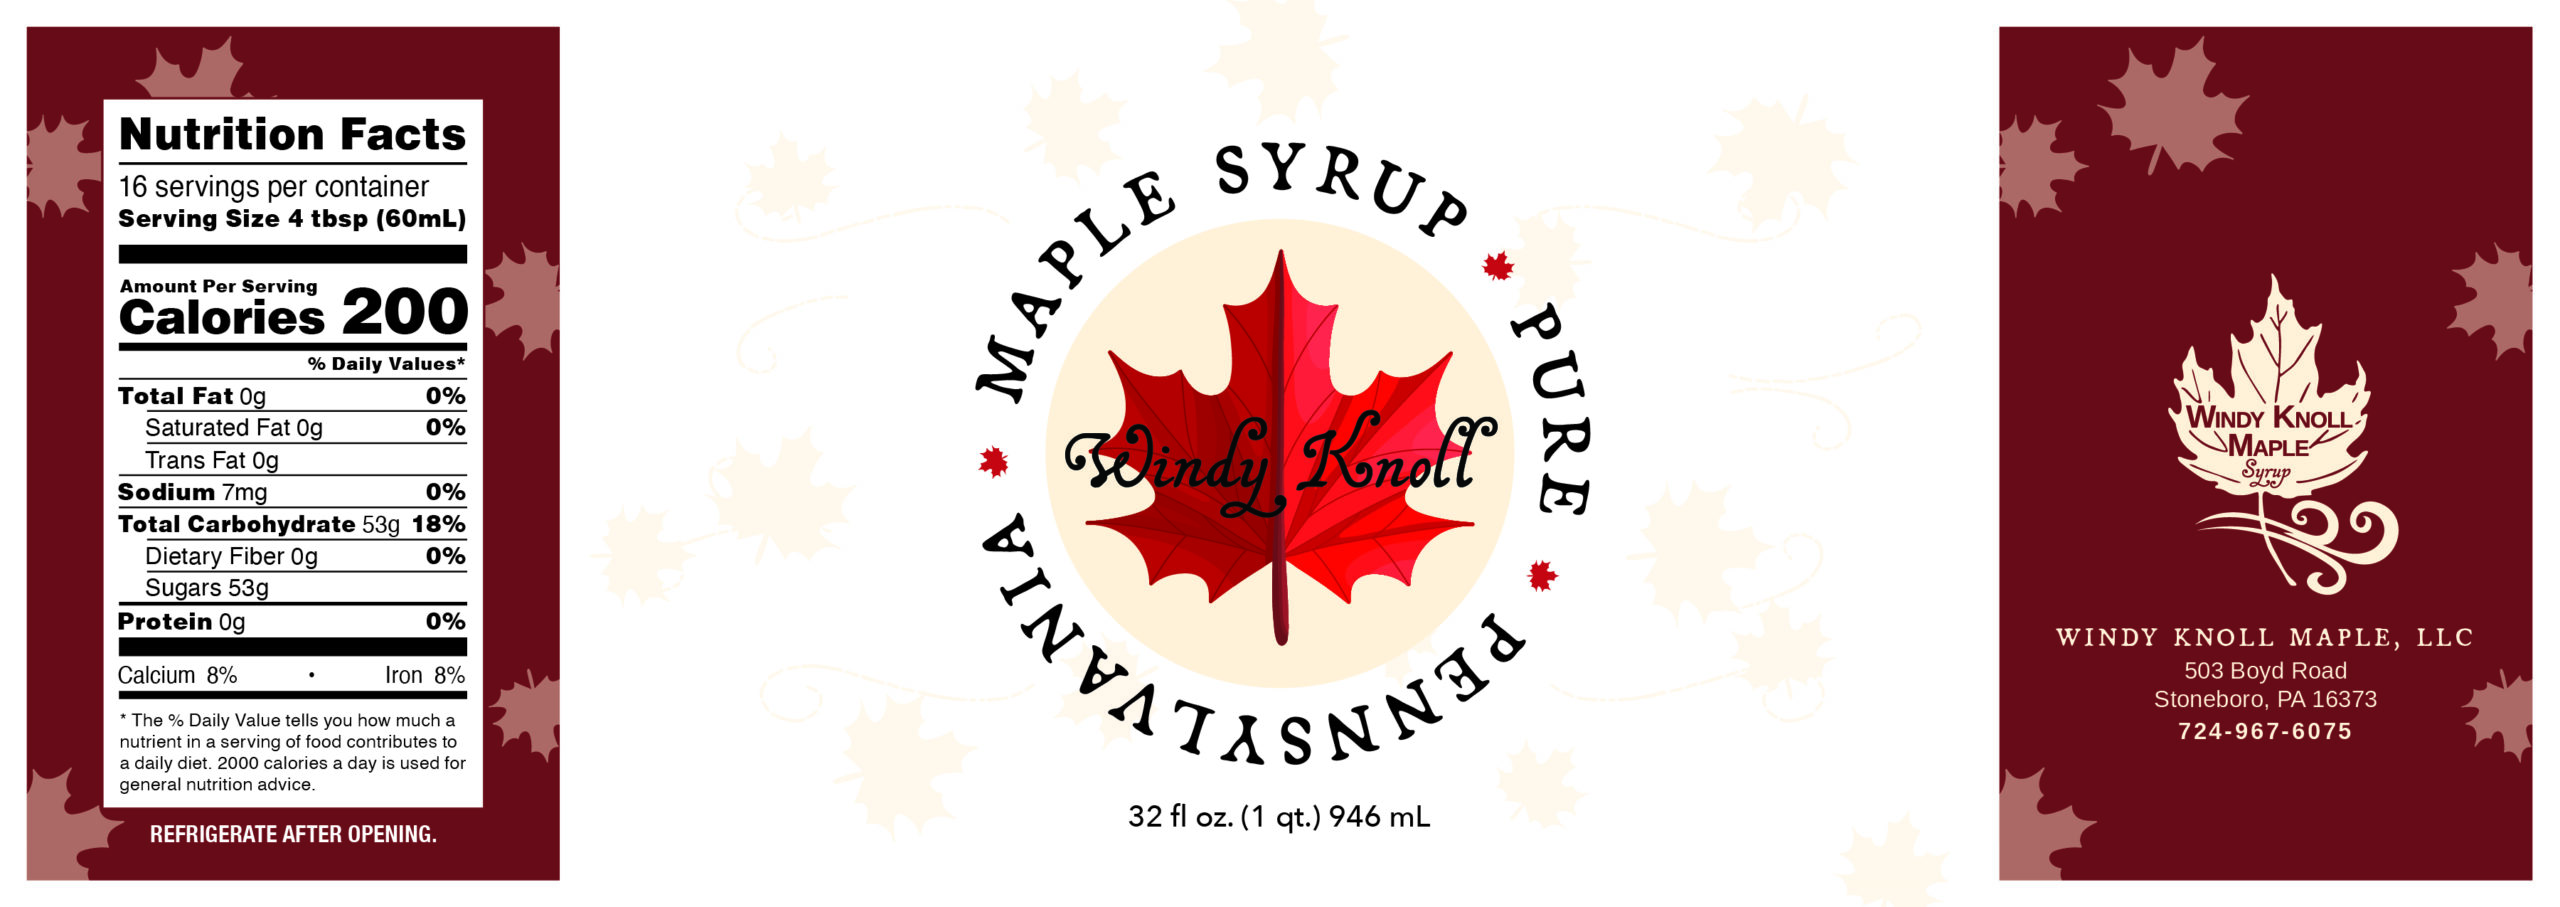 Windy Knoll Maple Syrup